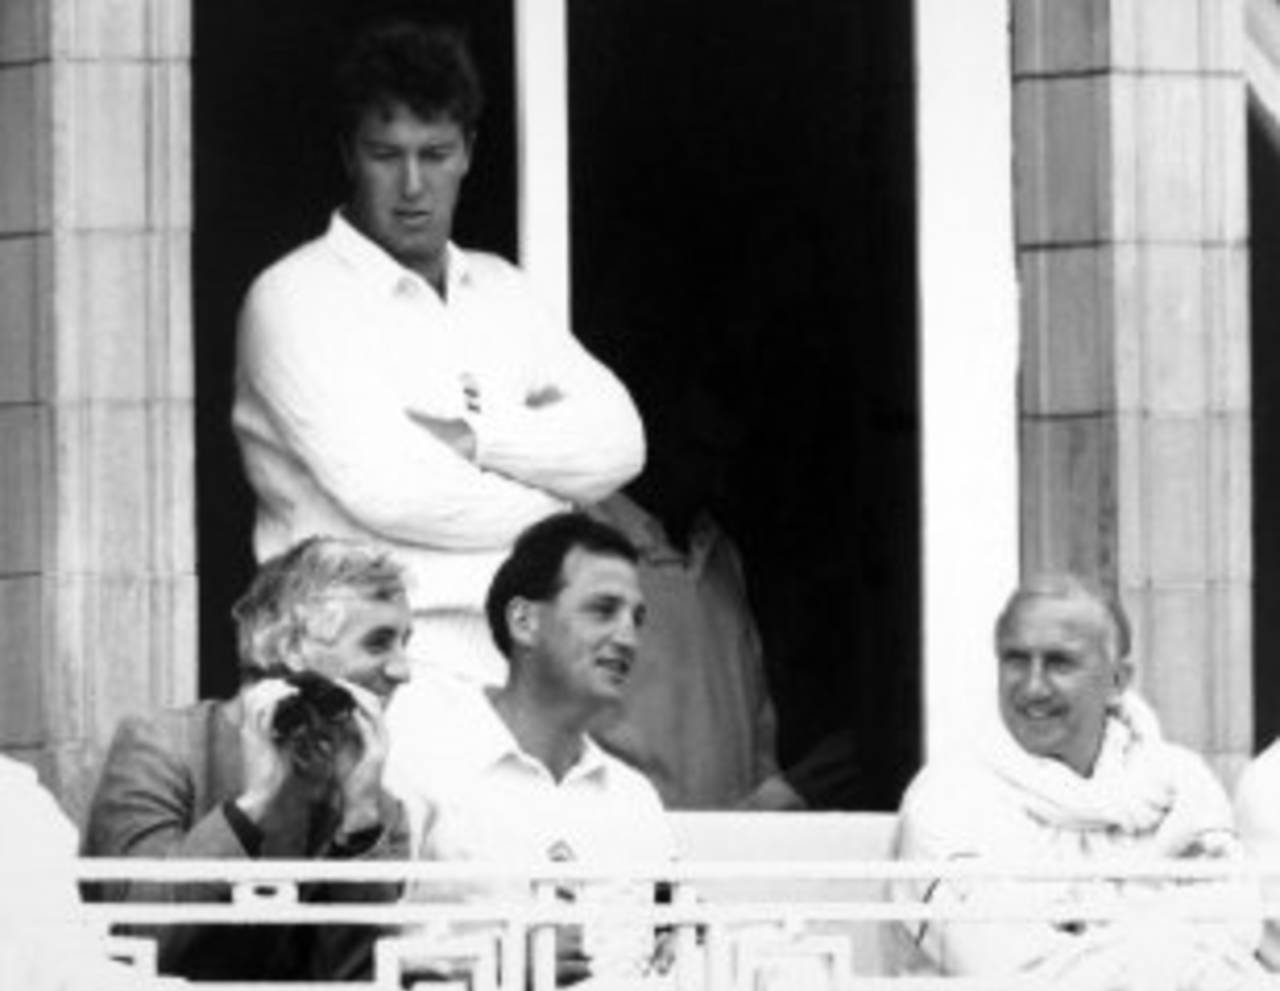 Former England captain Mike Brearely sits with current captain John Emburey and manager Micky Stewart in the balcony, and bowler Derek Pringle stands at the back, England v West Indies, 2nd Test, Lord's, June 17, 1988